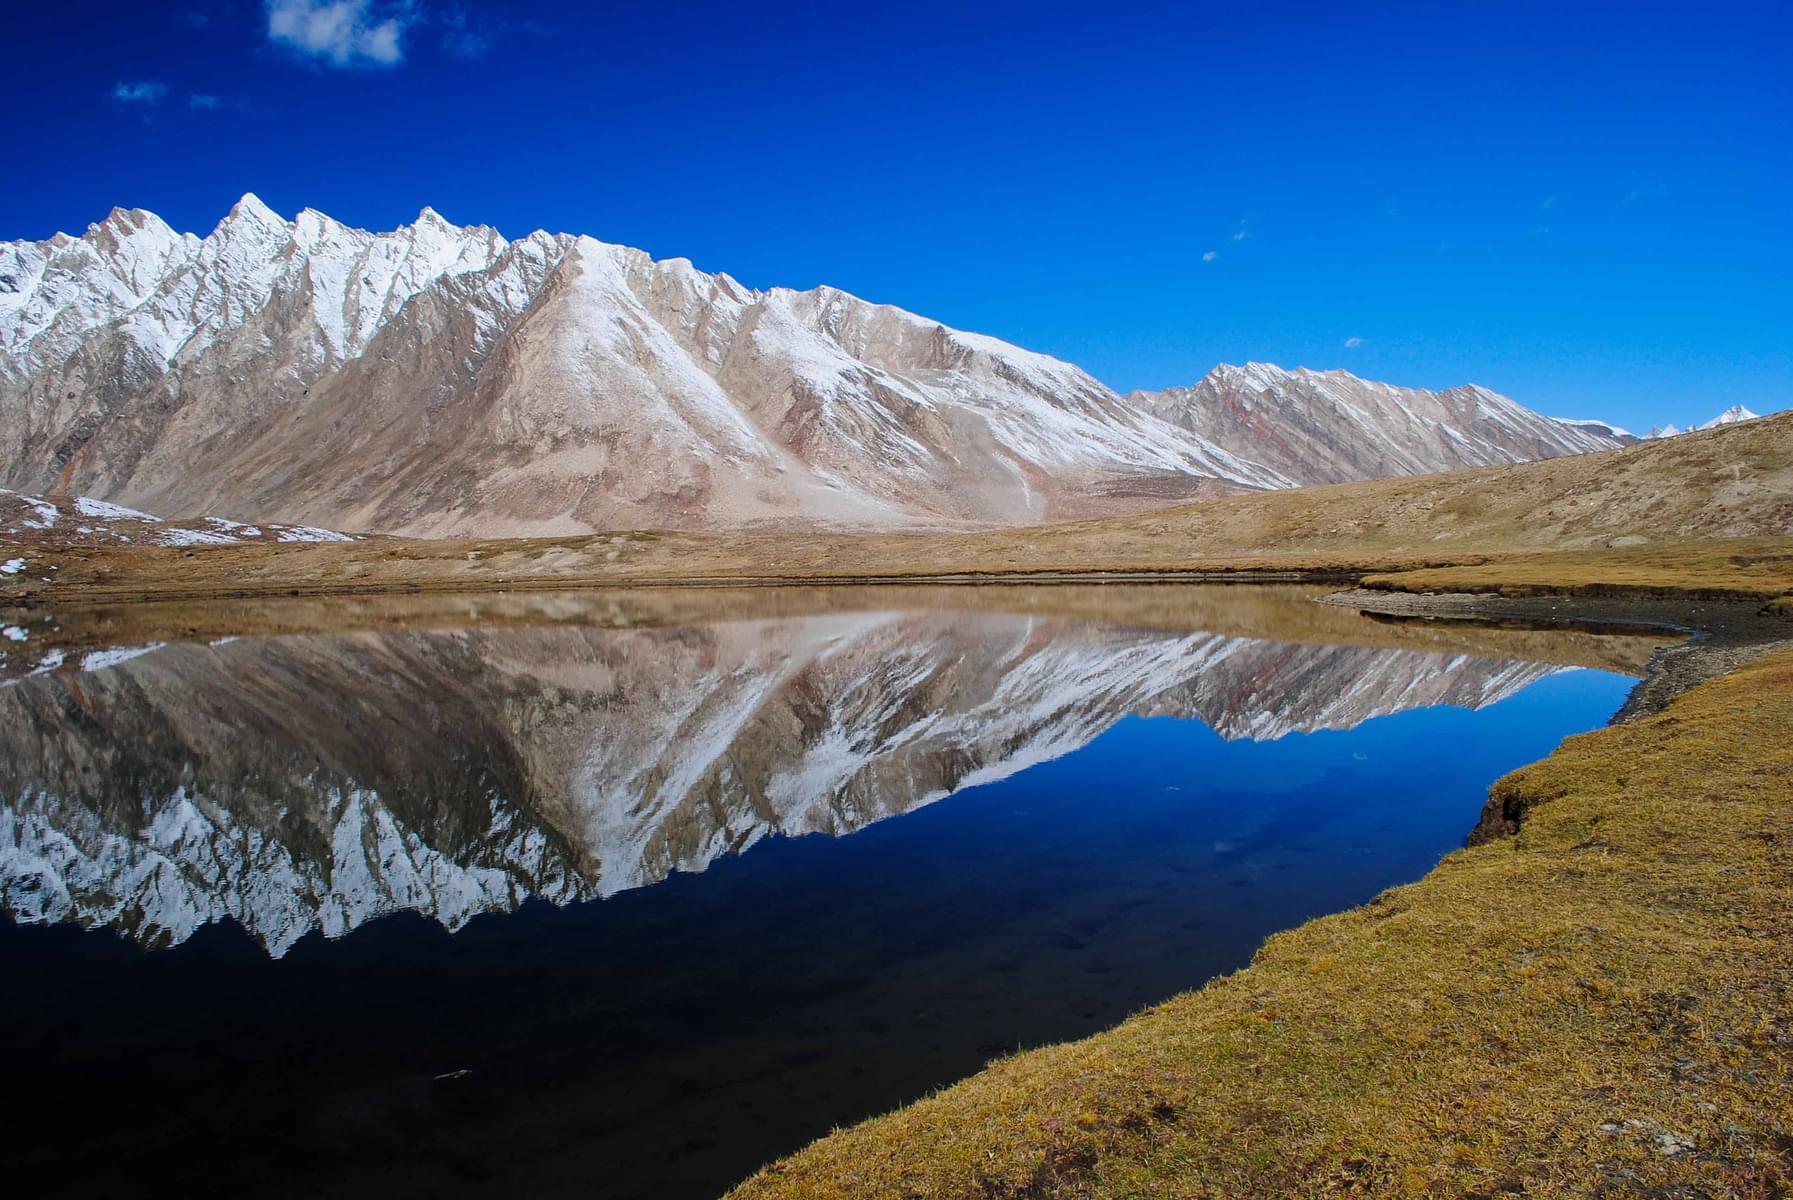 Be mesmerized by the reflection of barren hills in the beautiful lake